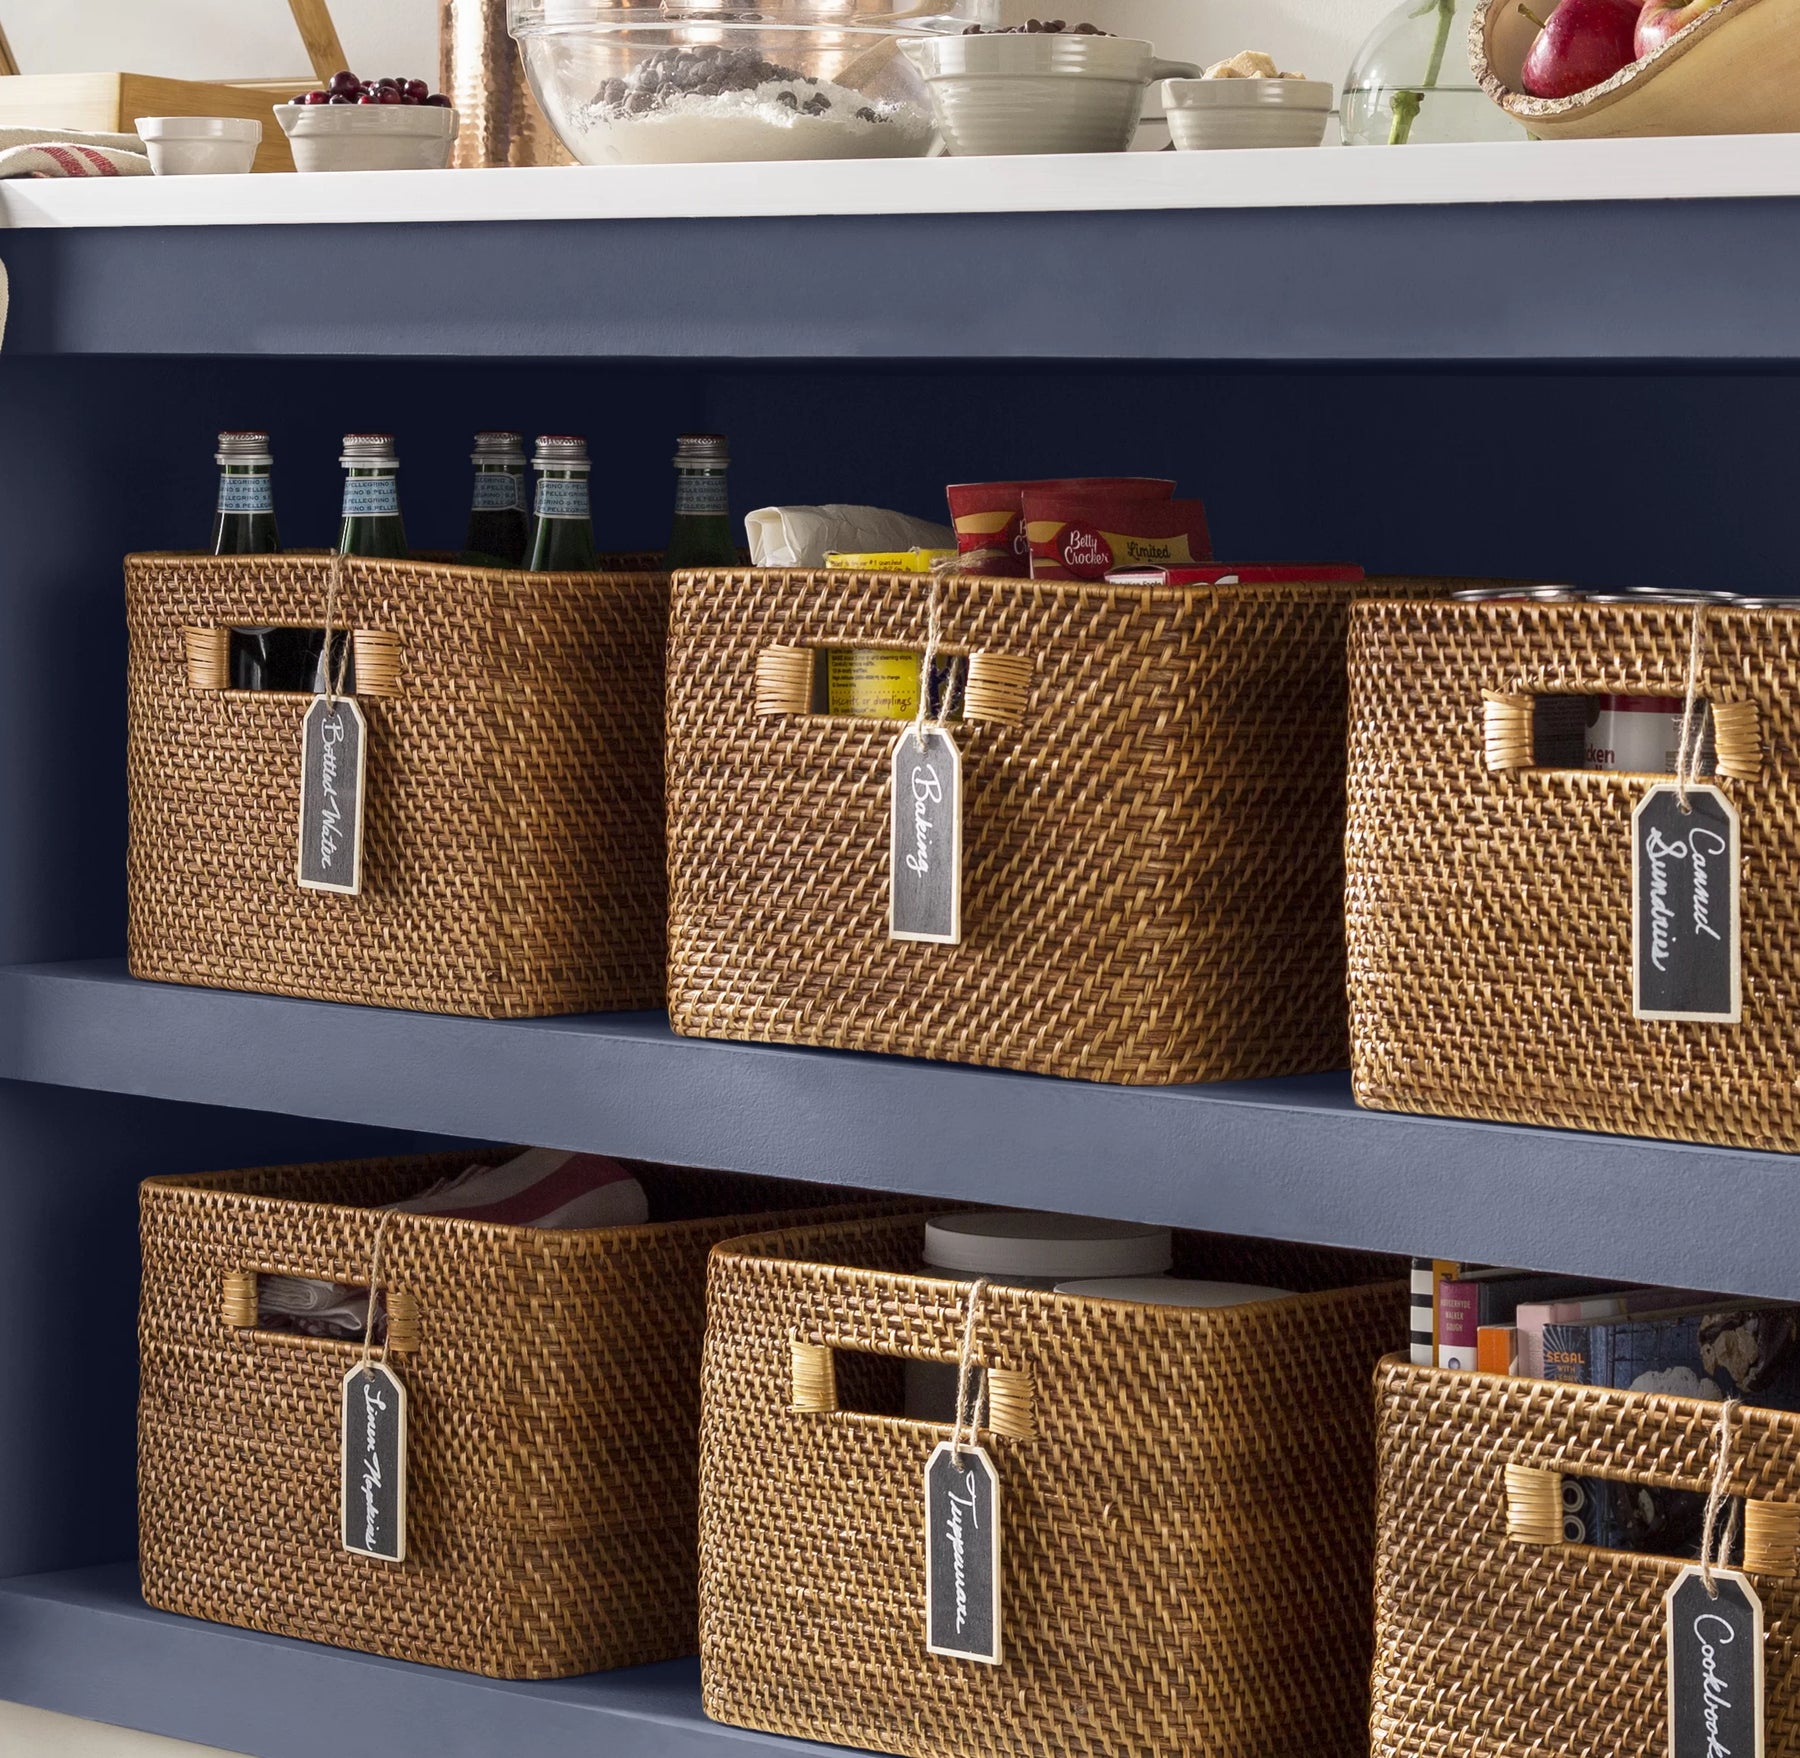 Buy Woven Baskets: Seagrass, Linen, Storage for Shelves